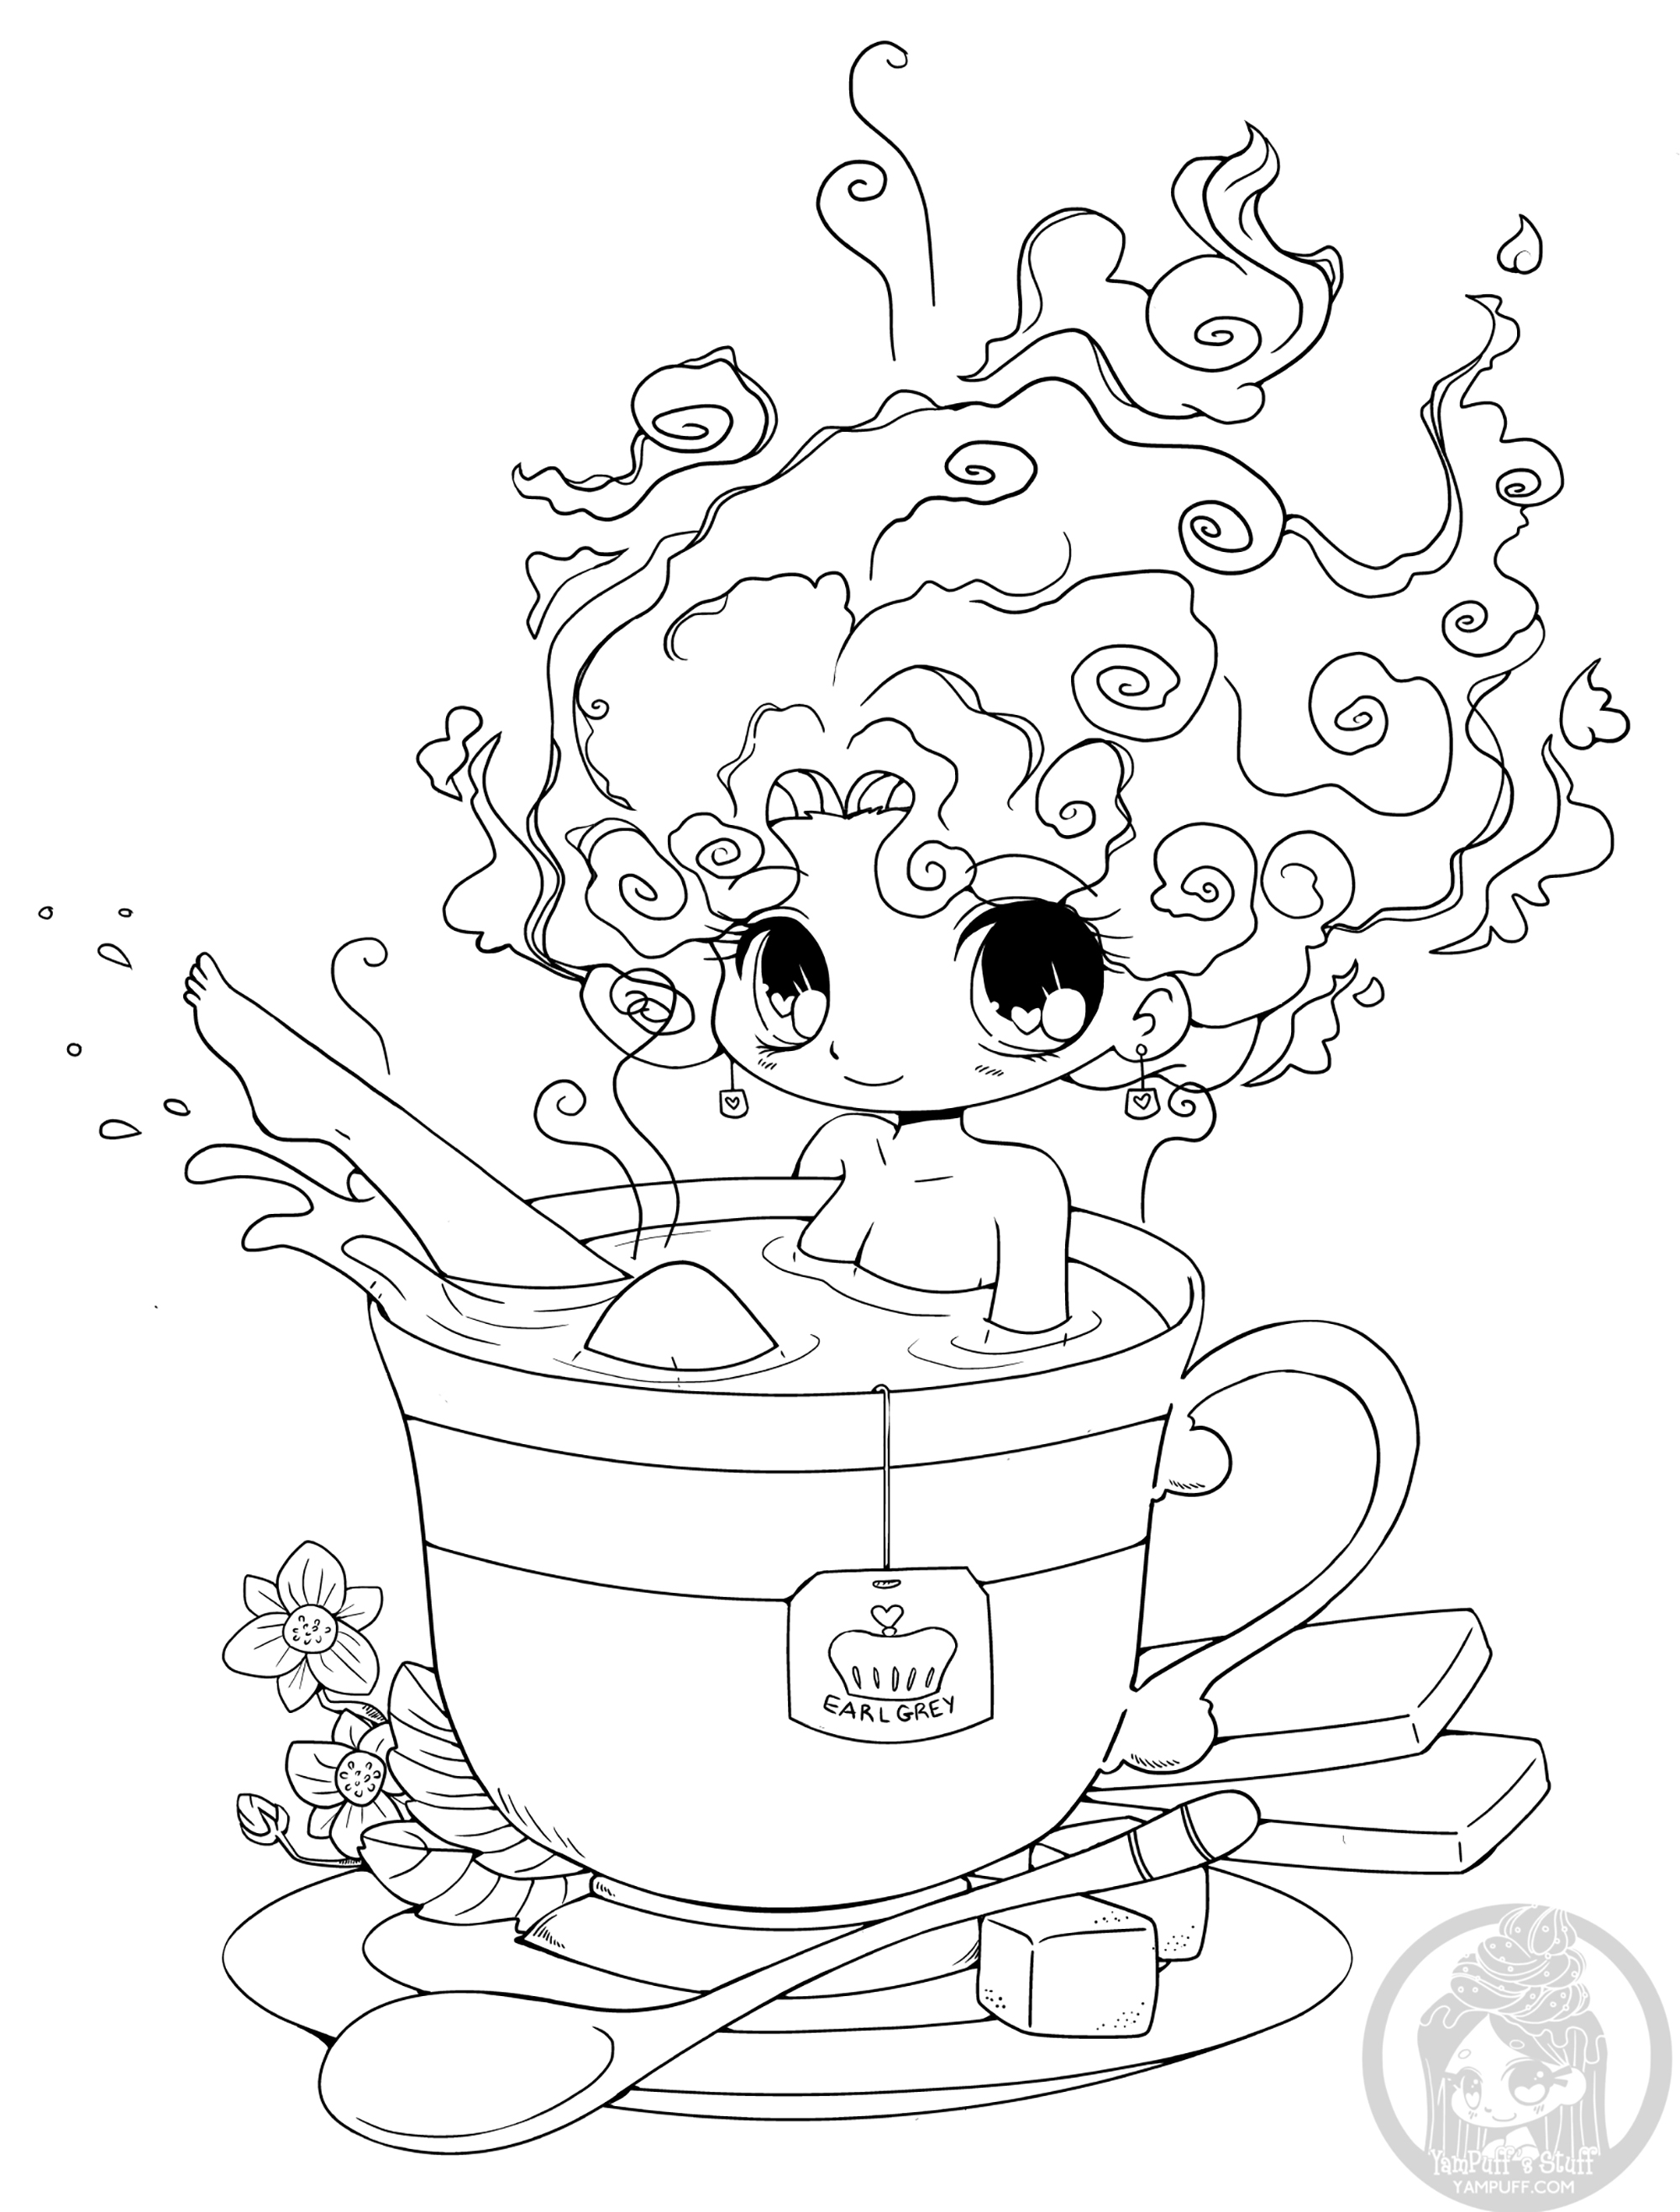 Tea girl - Return to childhood Adult Coloring Pages